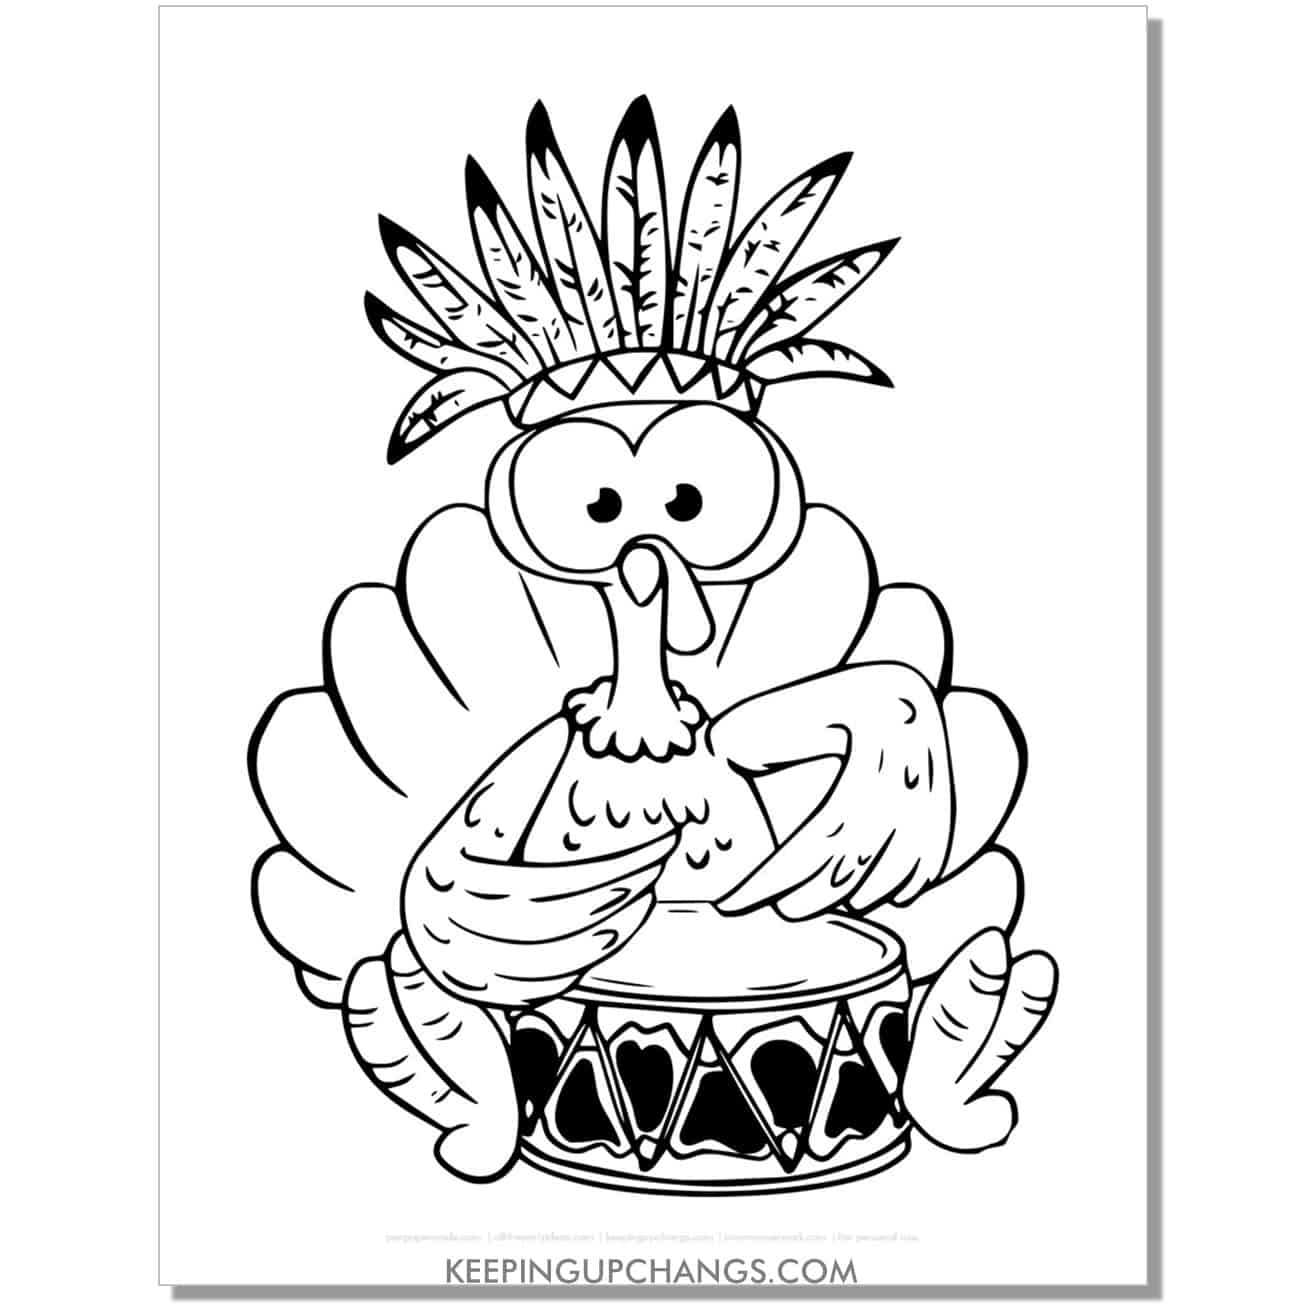 free native american indian turkey coloring page for fall, thanksgiving.